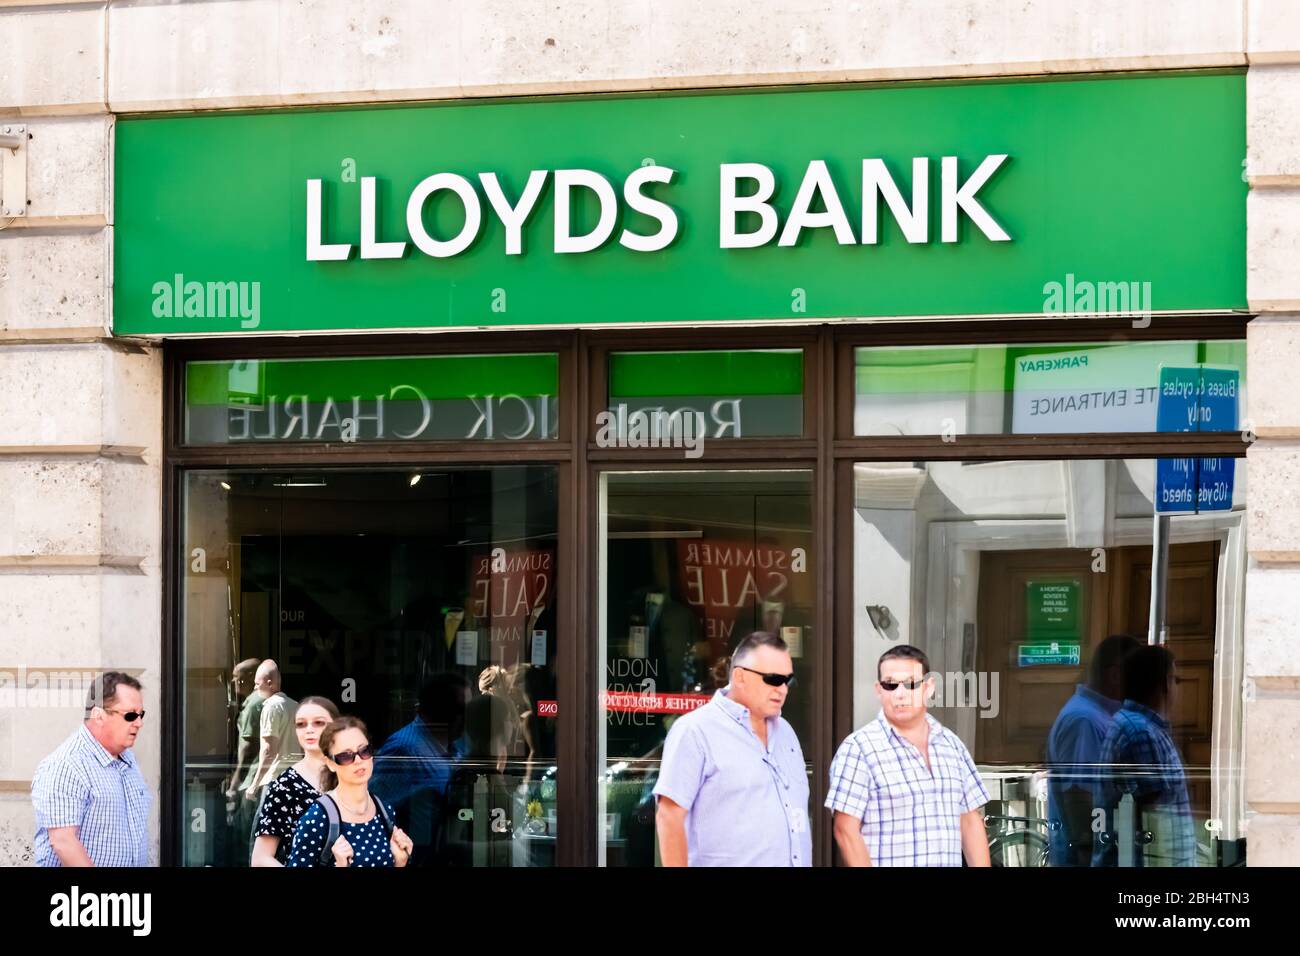 London, UK - June 26, 2018: Lloyds Bank sign on branch office in city downtown financial district with candid people walking on sidewalk Stock Photo